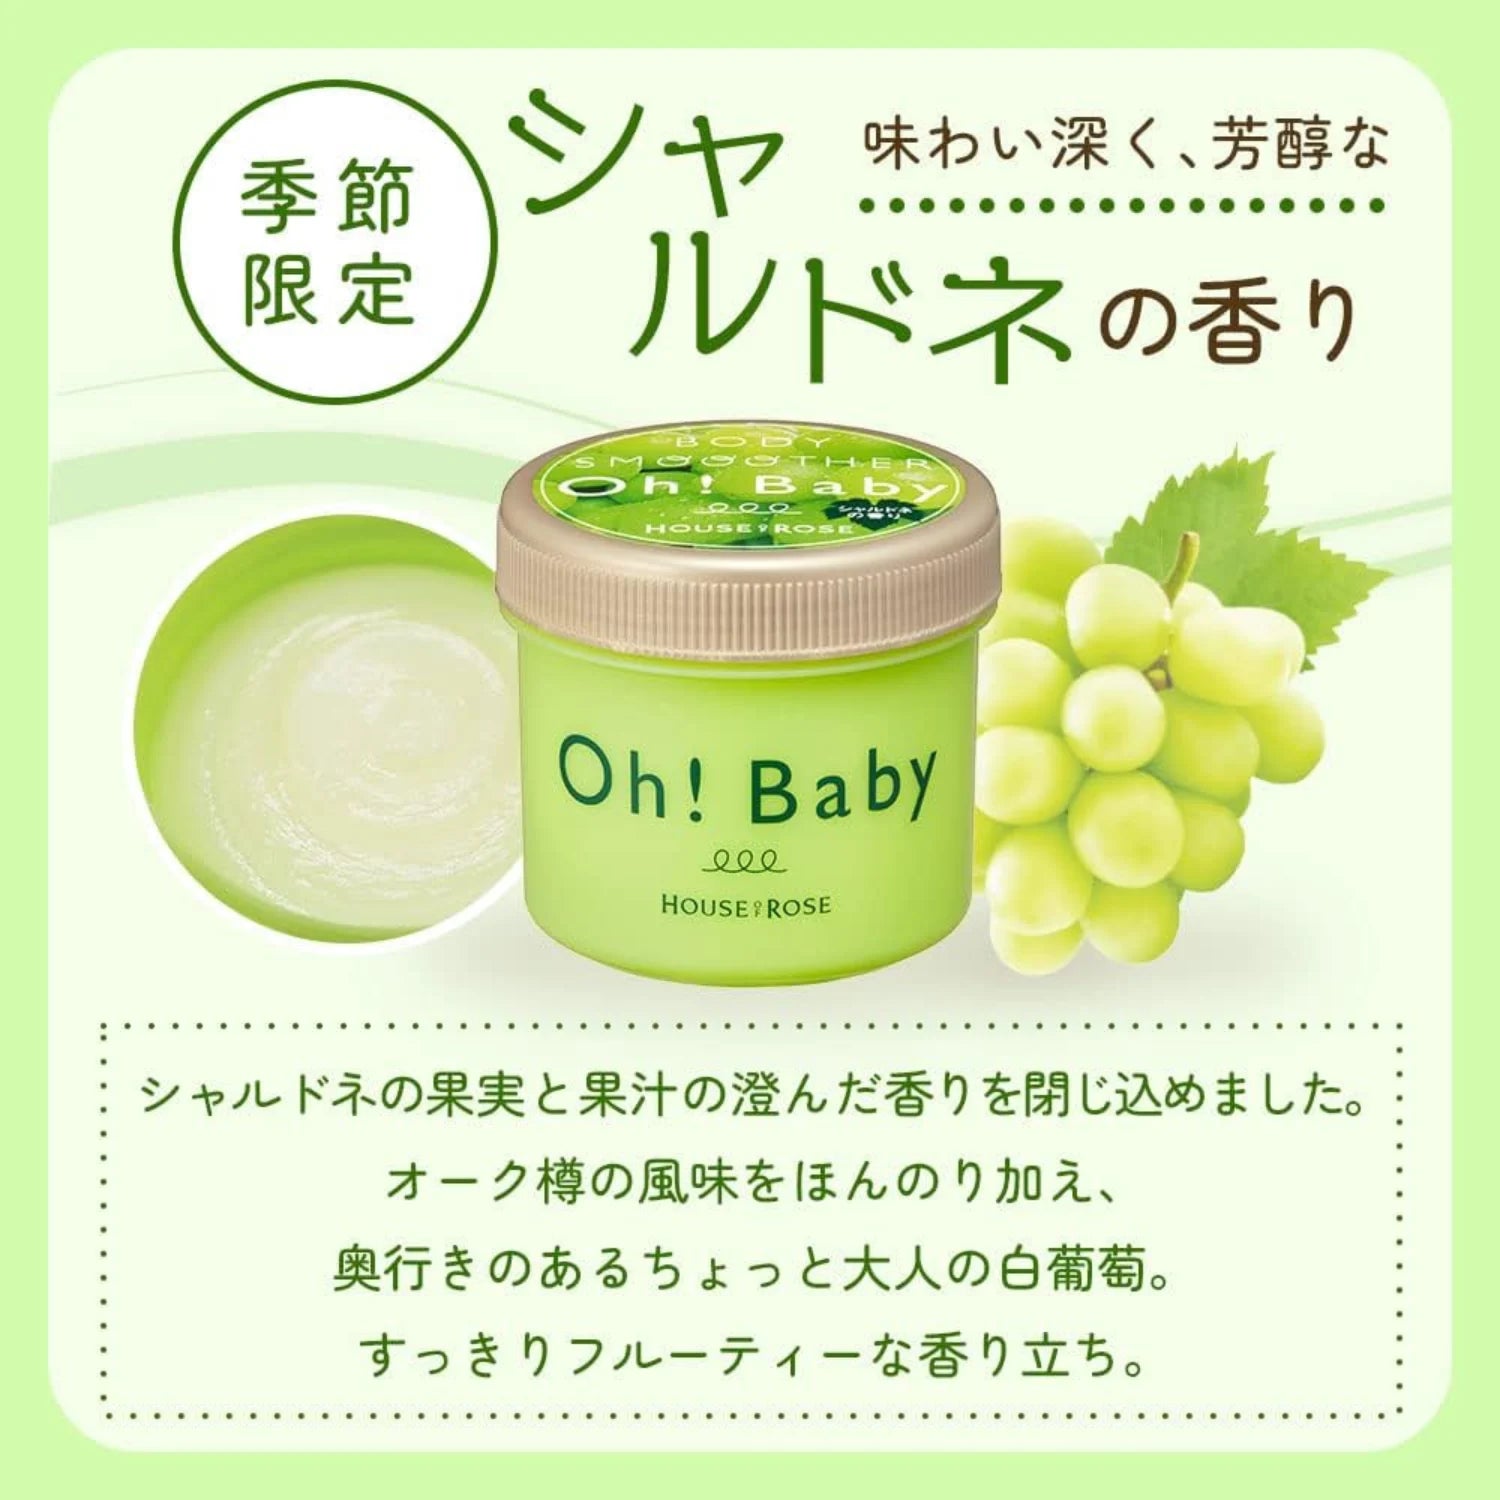 House Of Rose Oh! Baby Body Scrub Smoother Cream Chardonnay 200g - Buy Me Japan